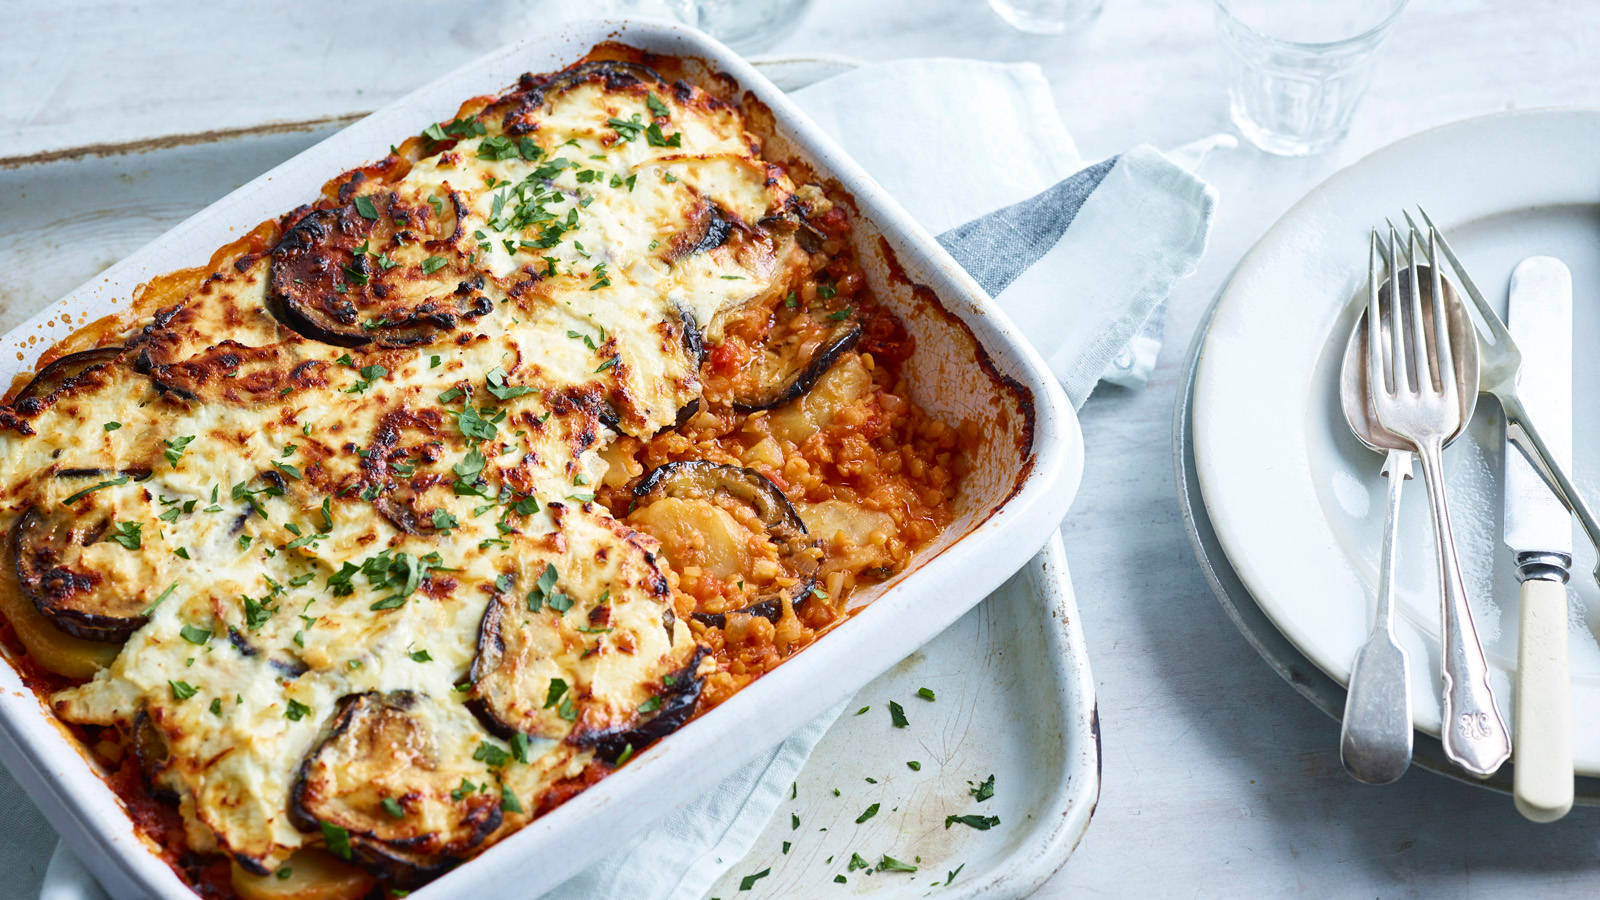 Tray Of Moussaka Near The Plates With Cutlery Wallpaper